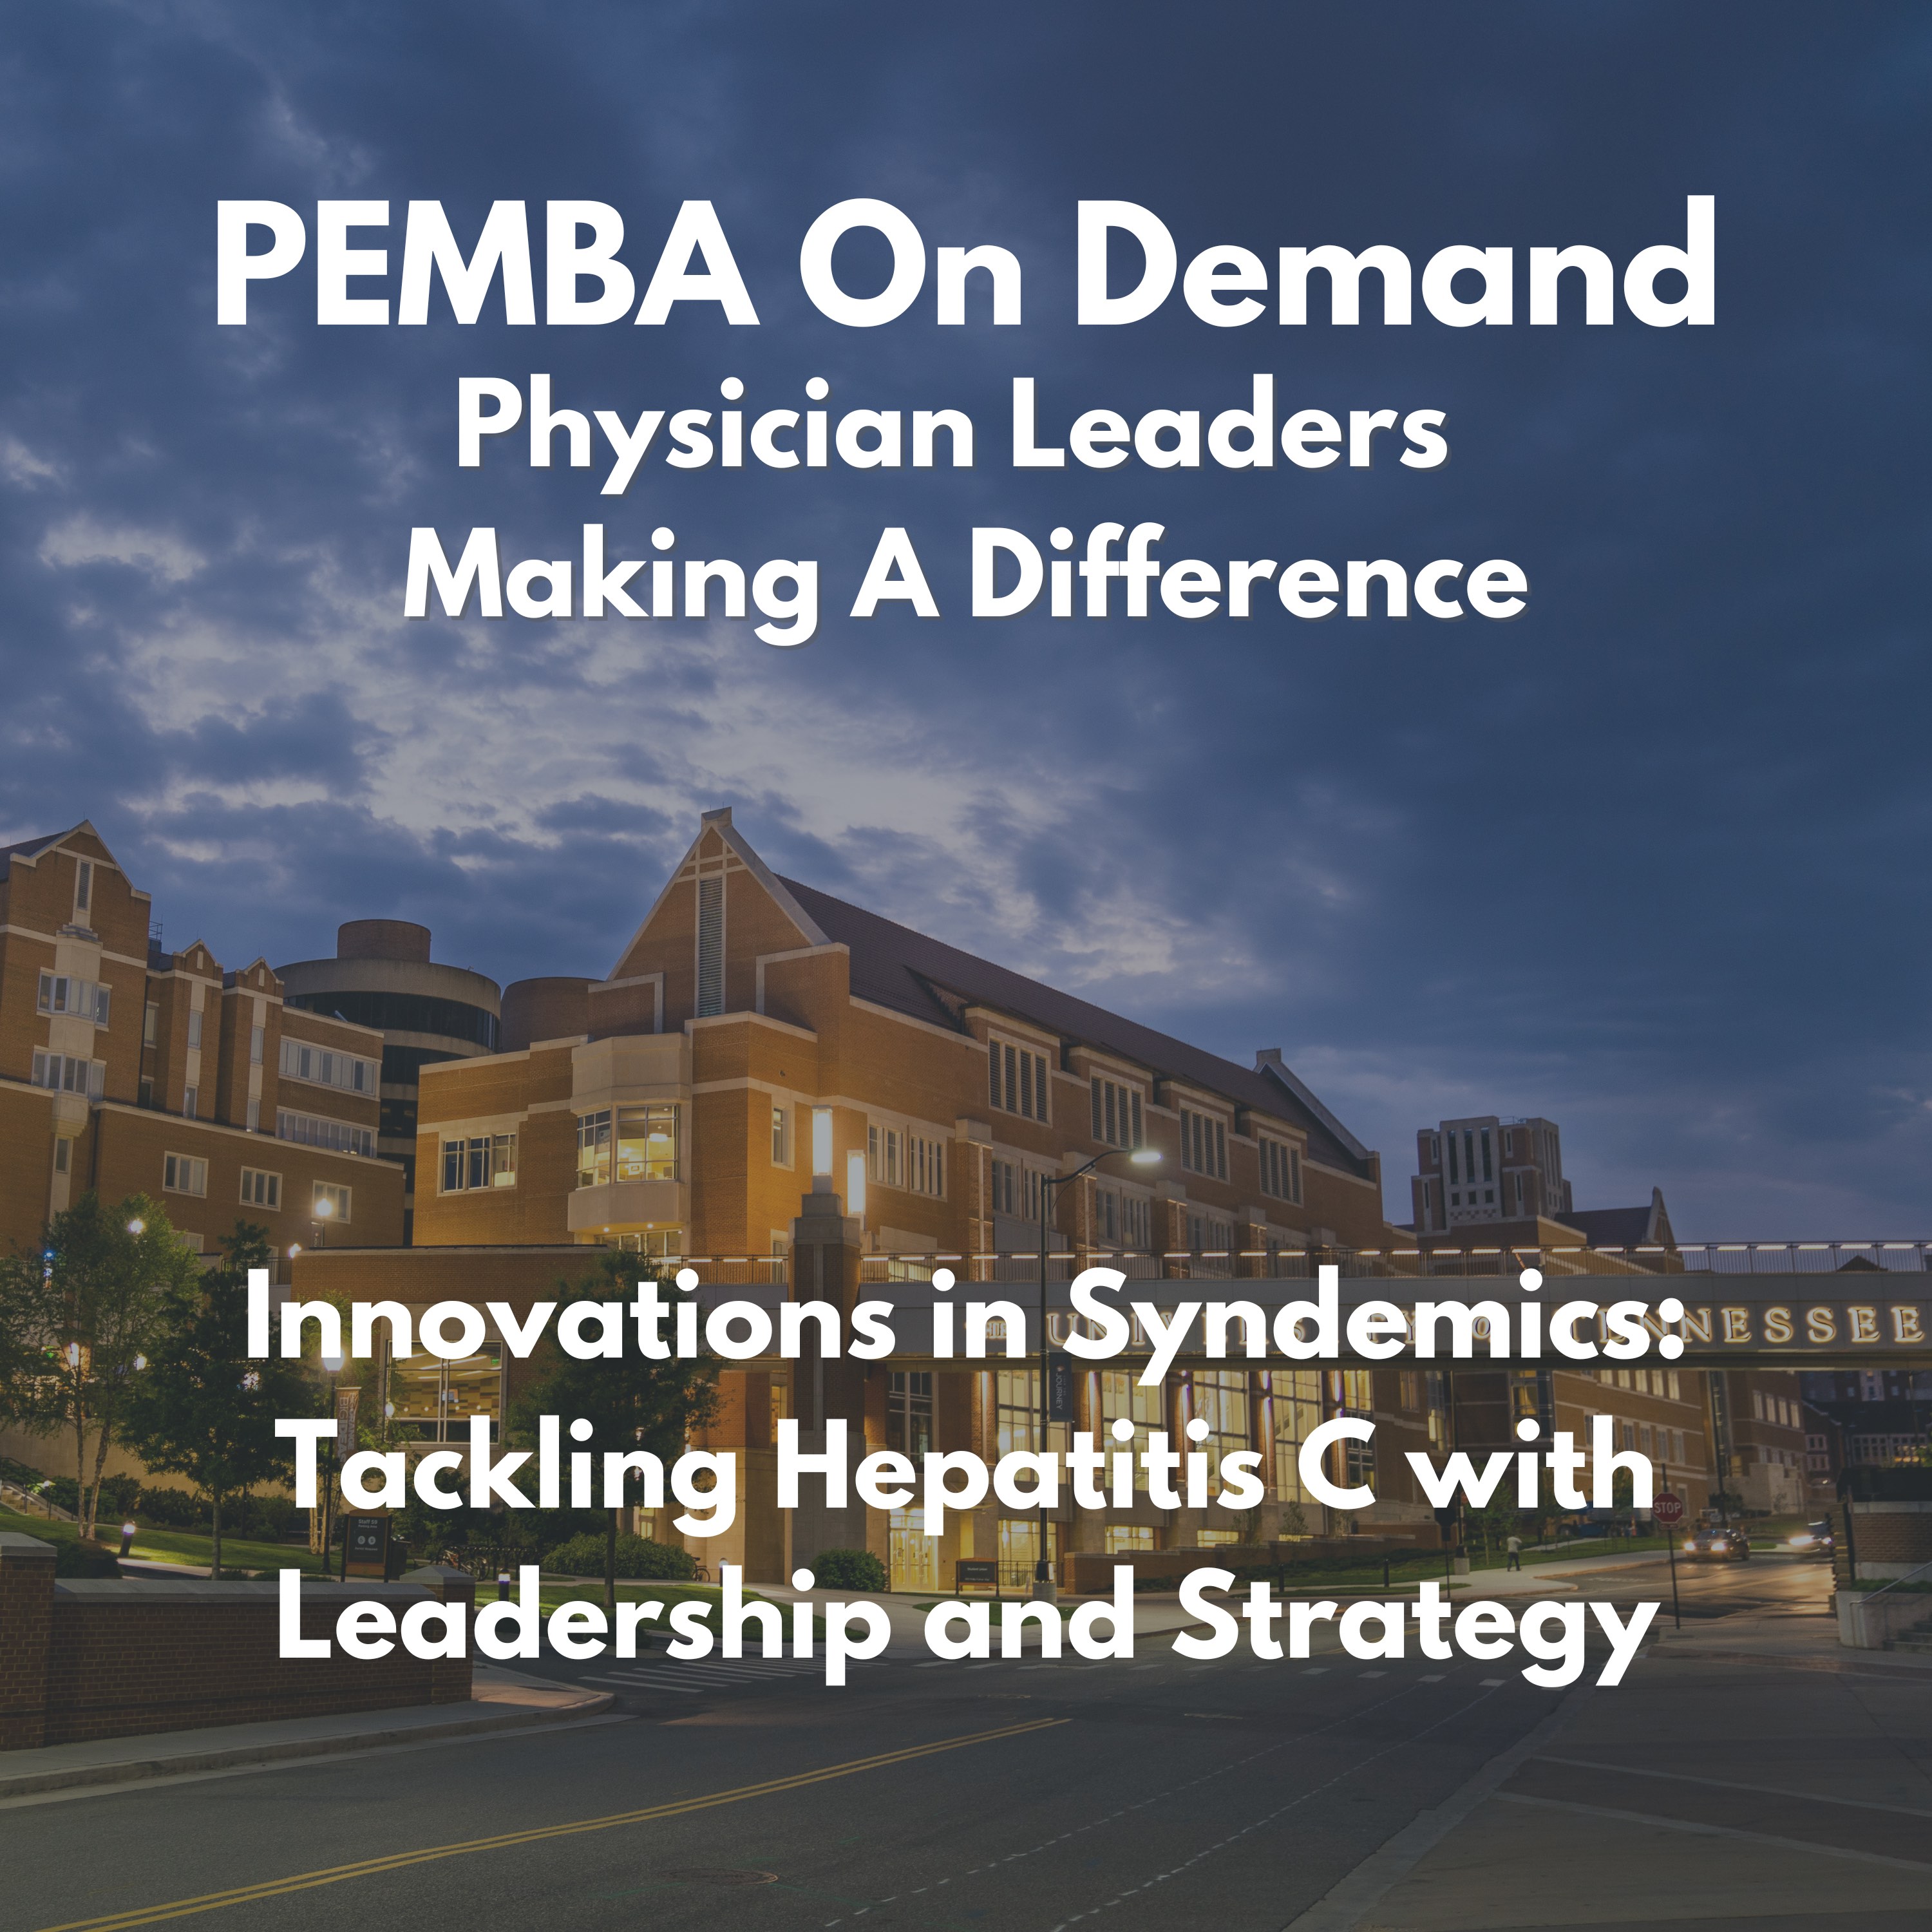 Innovations in Syndemics: Tackling Hepatitis C with Leadership and Strategy